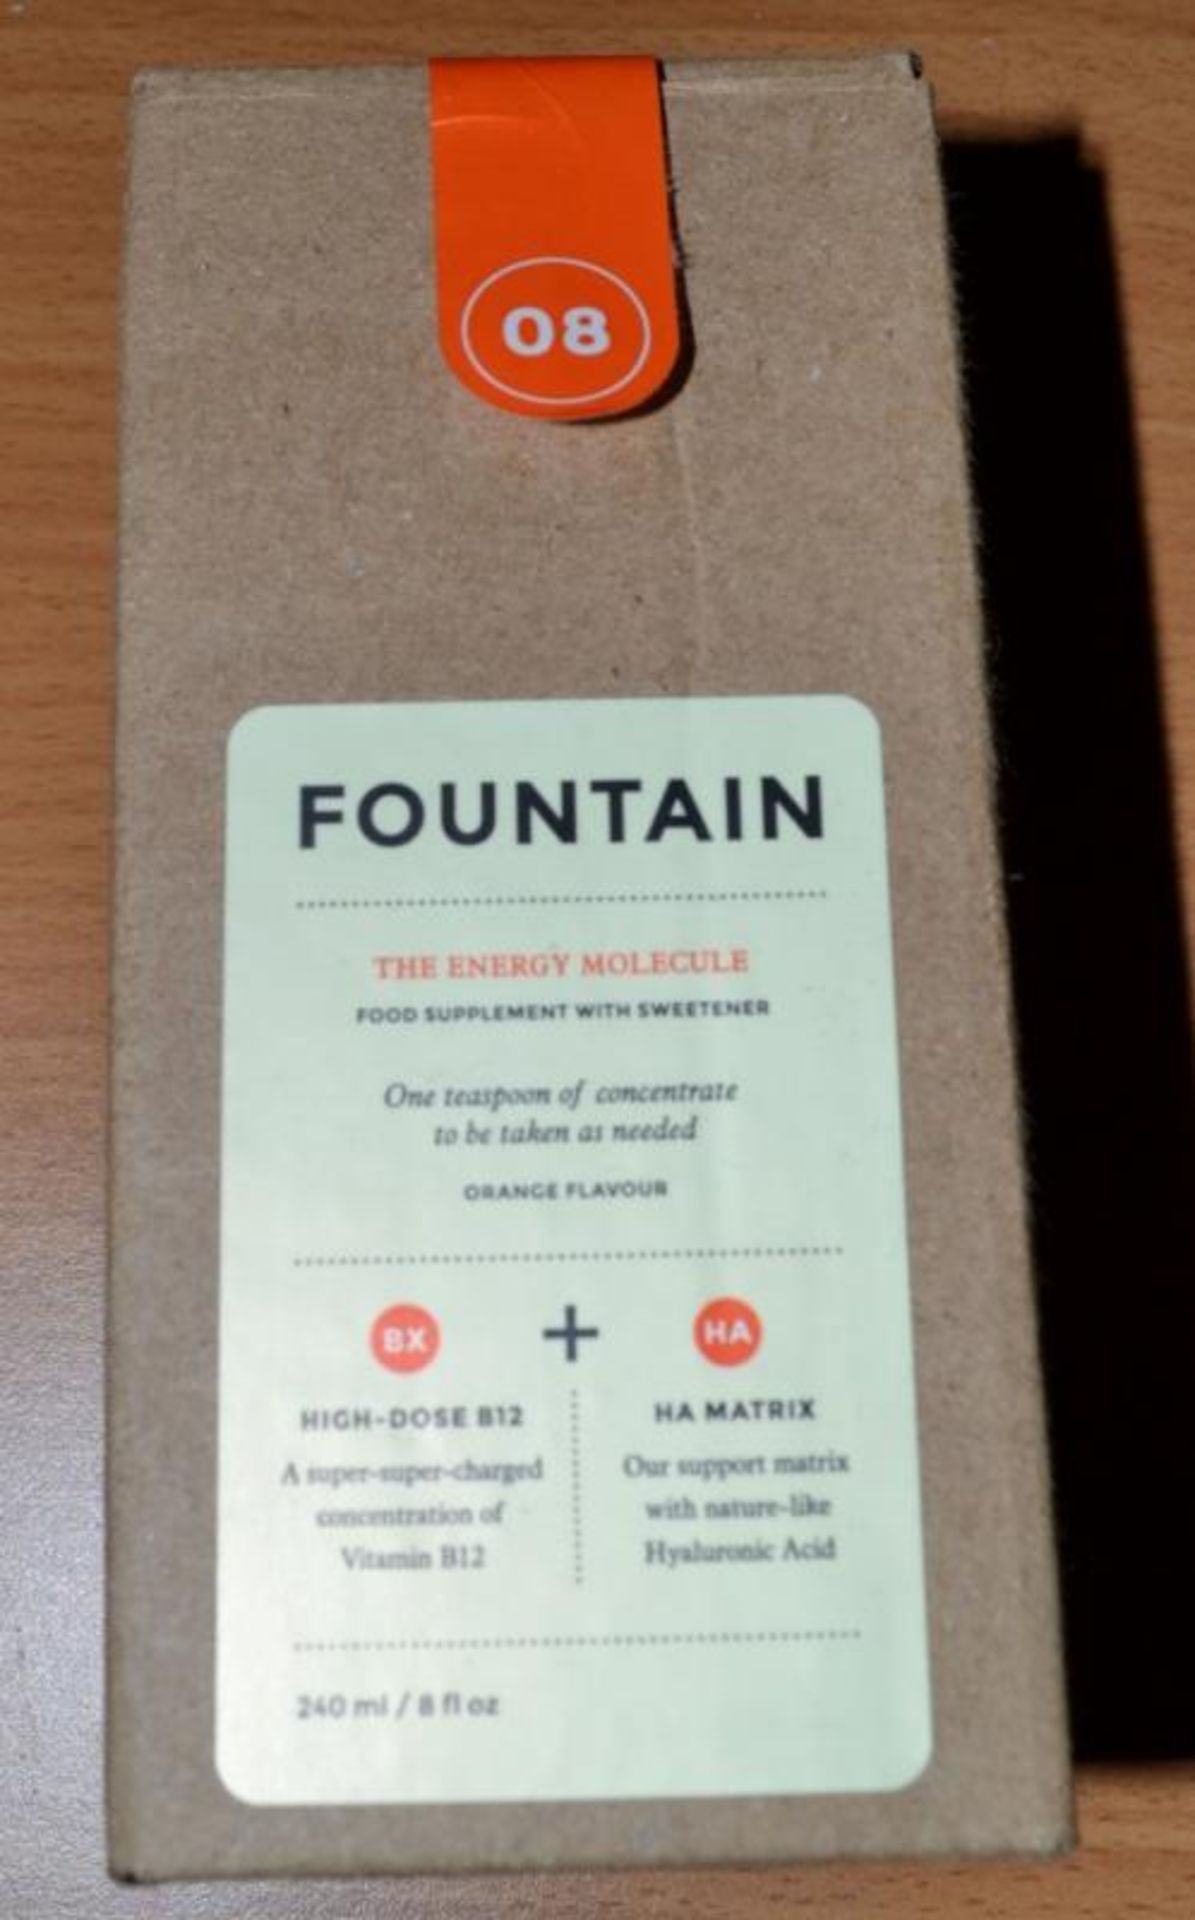 10 x 240ml Bottles of Fountain, The Energy Molecule Supplement - New & Boxed - CL185 - Ref: - Image 7 of 7